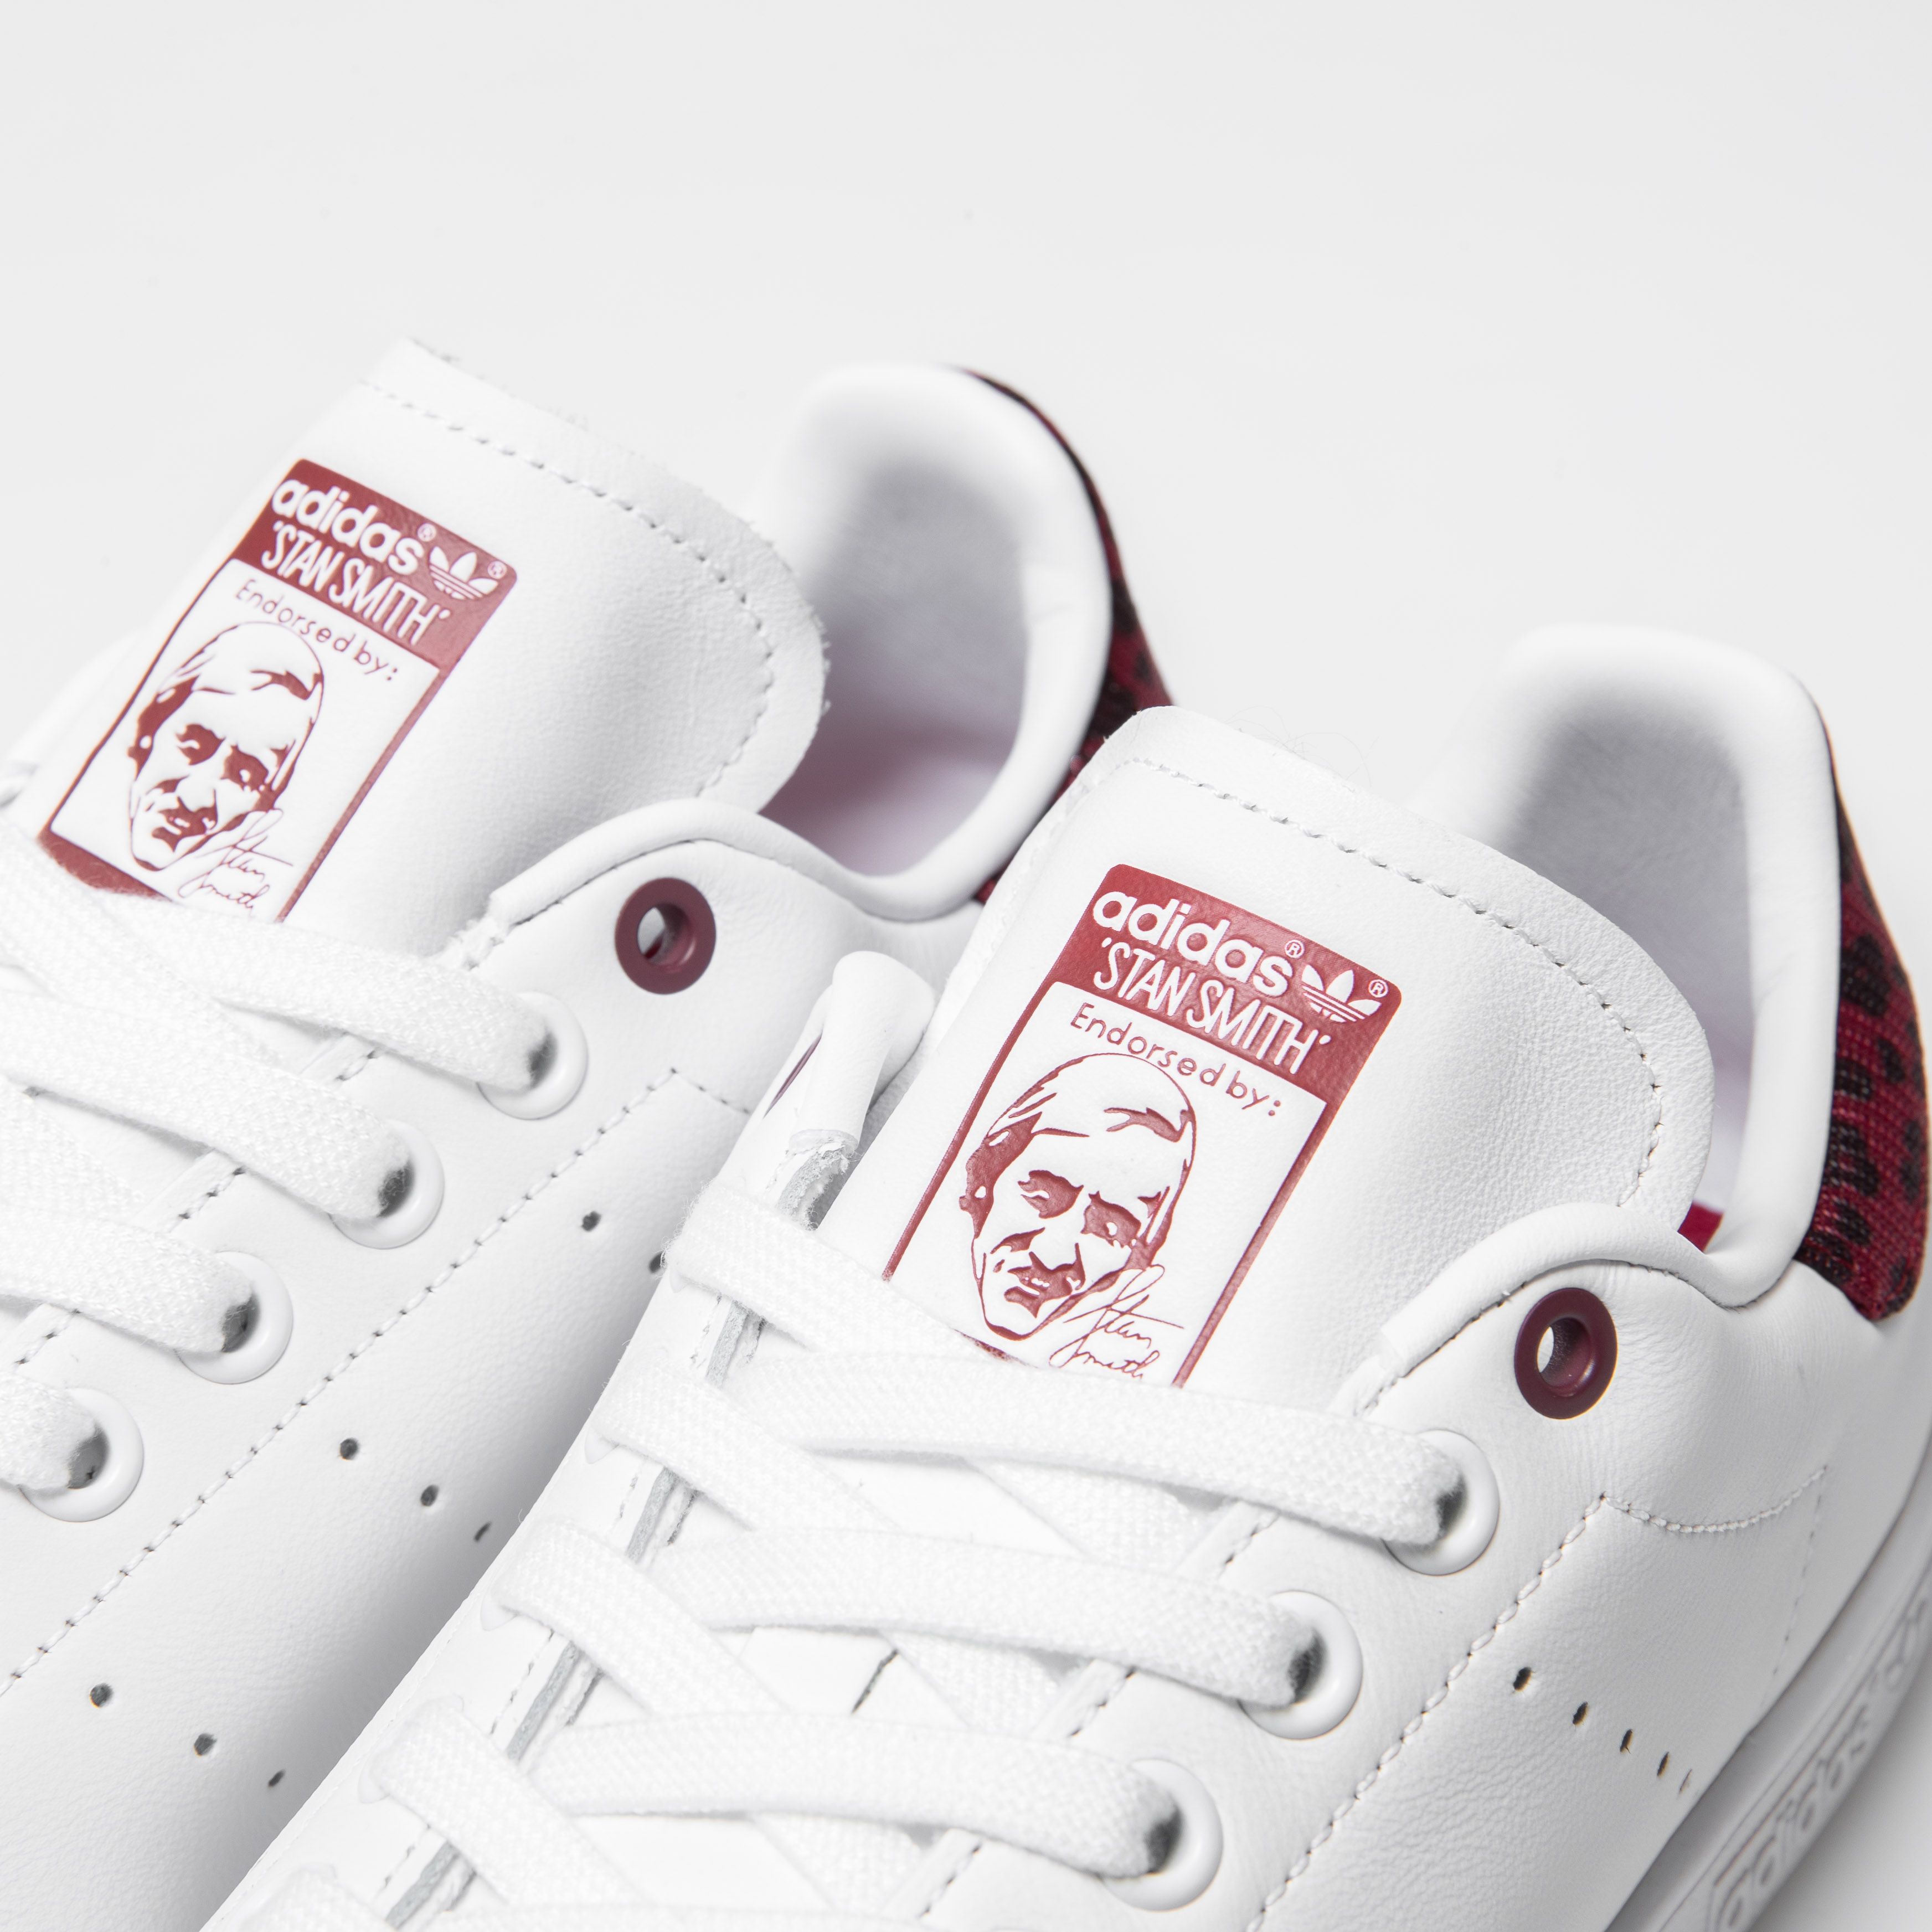 Titolo on Twitter: "new in | adidas Stan Smith w "White/Collegiate  Burgundy" get yours NOW ➡️ https://t.co/Z0BT7pOR6A UK 3.5 (36) - UK 7.5 (40  2/3) style code 🔎 EE4896 #adidas #adidasstansmith #stansmith #